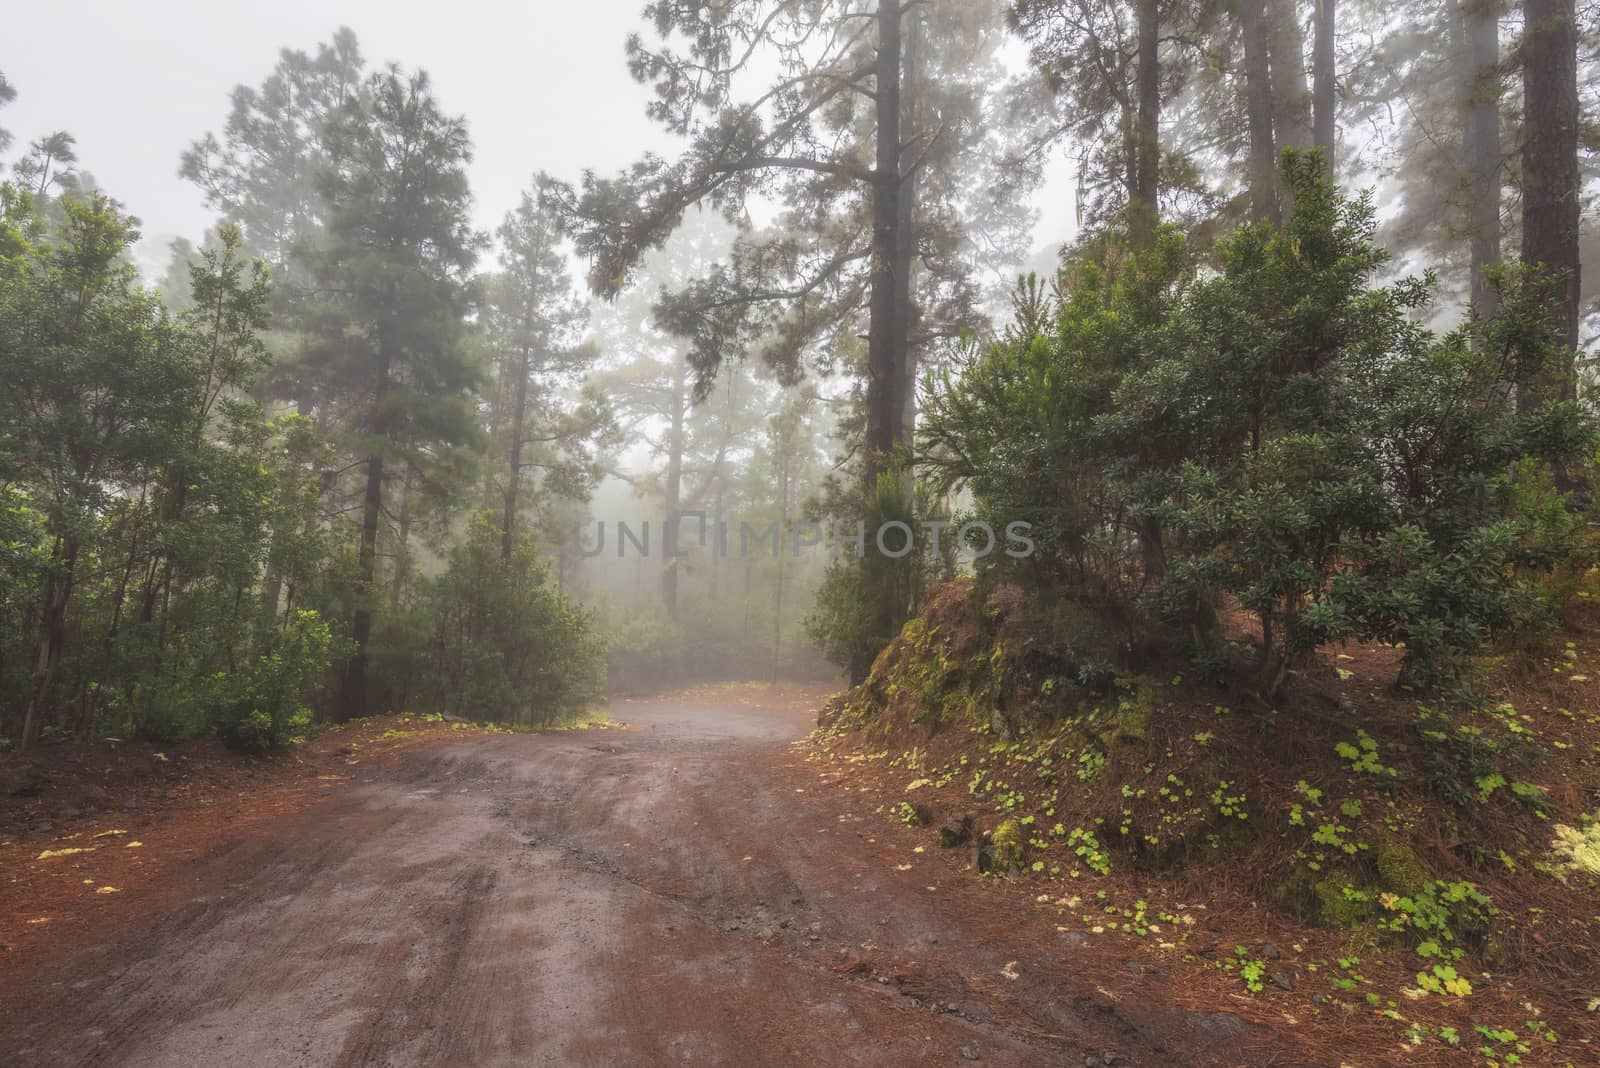 Beautiful foggy forest in Arenas Negras, Tenerife, Canary islands, Spain.